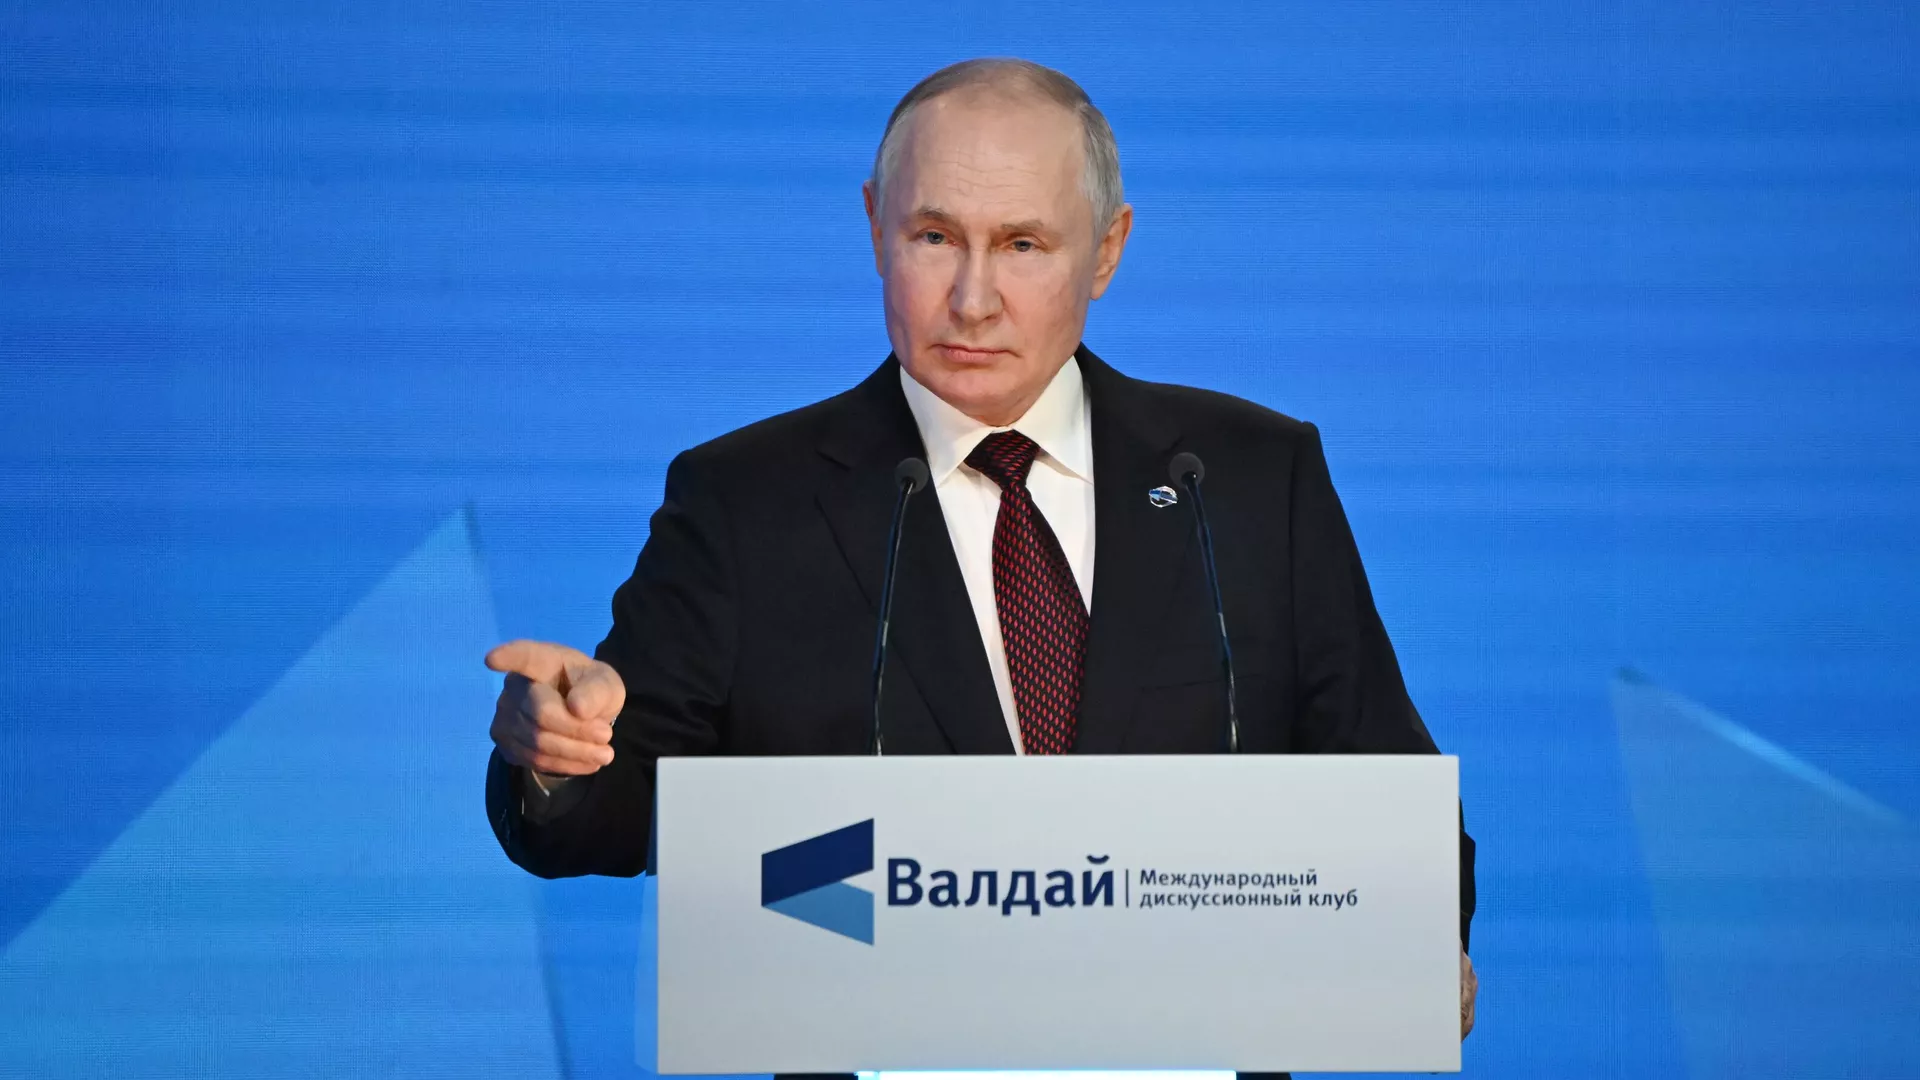 Is Vladimir Putin’s Vision of a Multipolar World the Antidote to the New World Order?